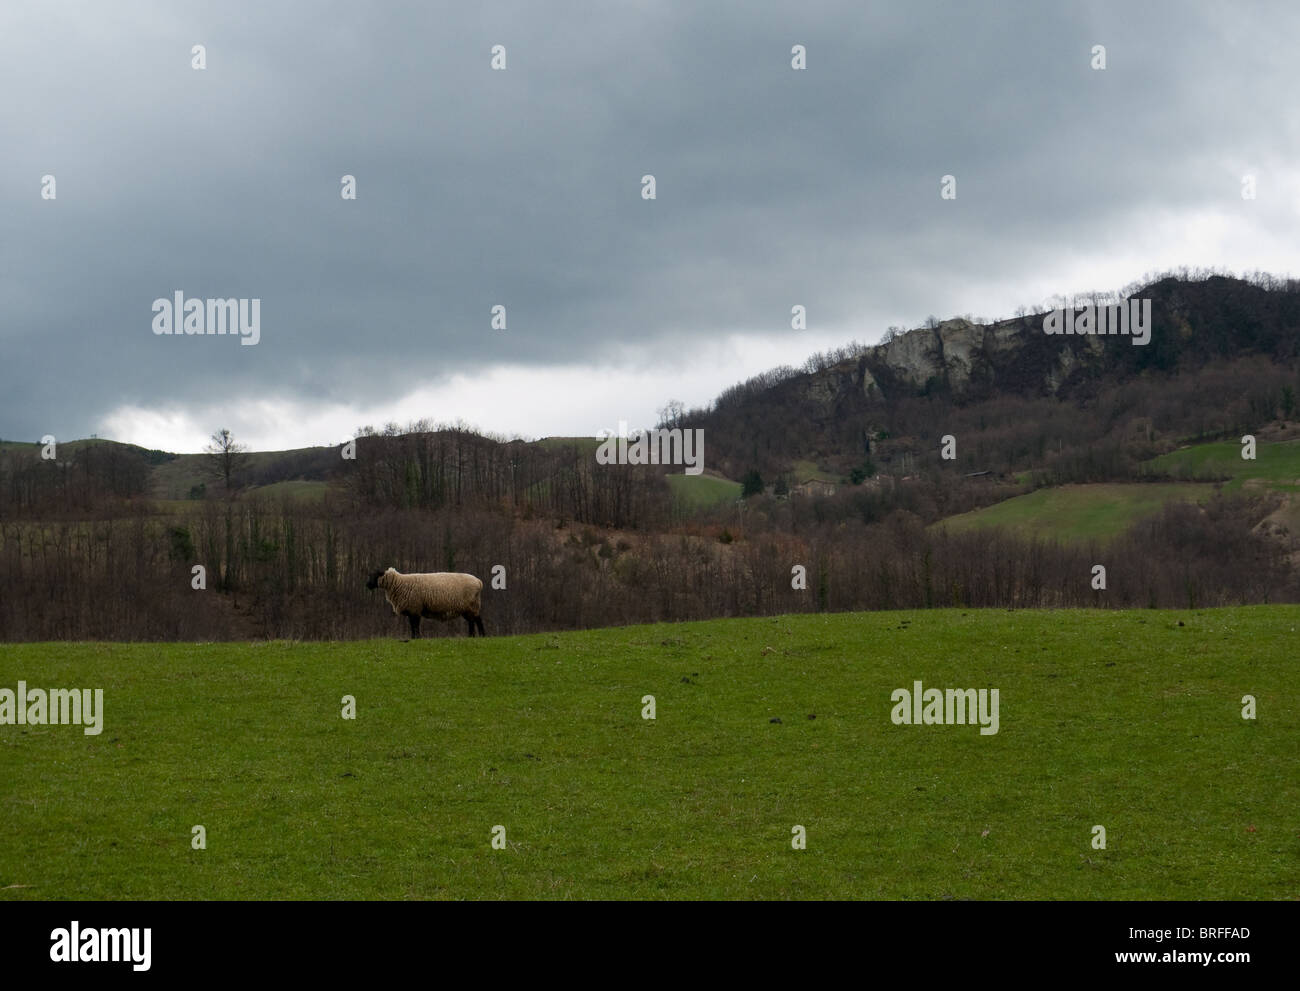 Lonely sheep grazing on a green grass land, cloudy weather, Italian countryside. Stock Photo